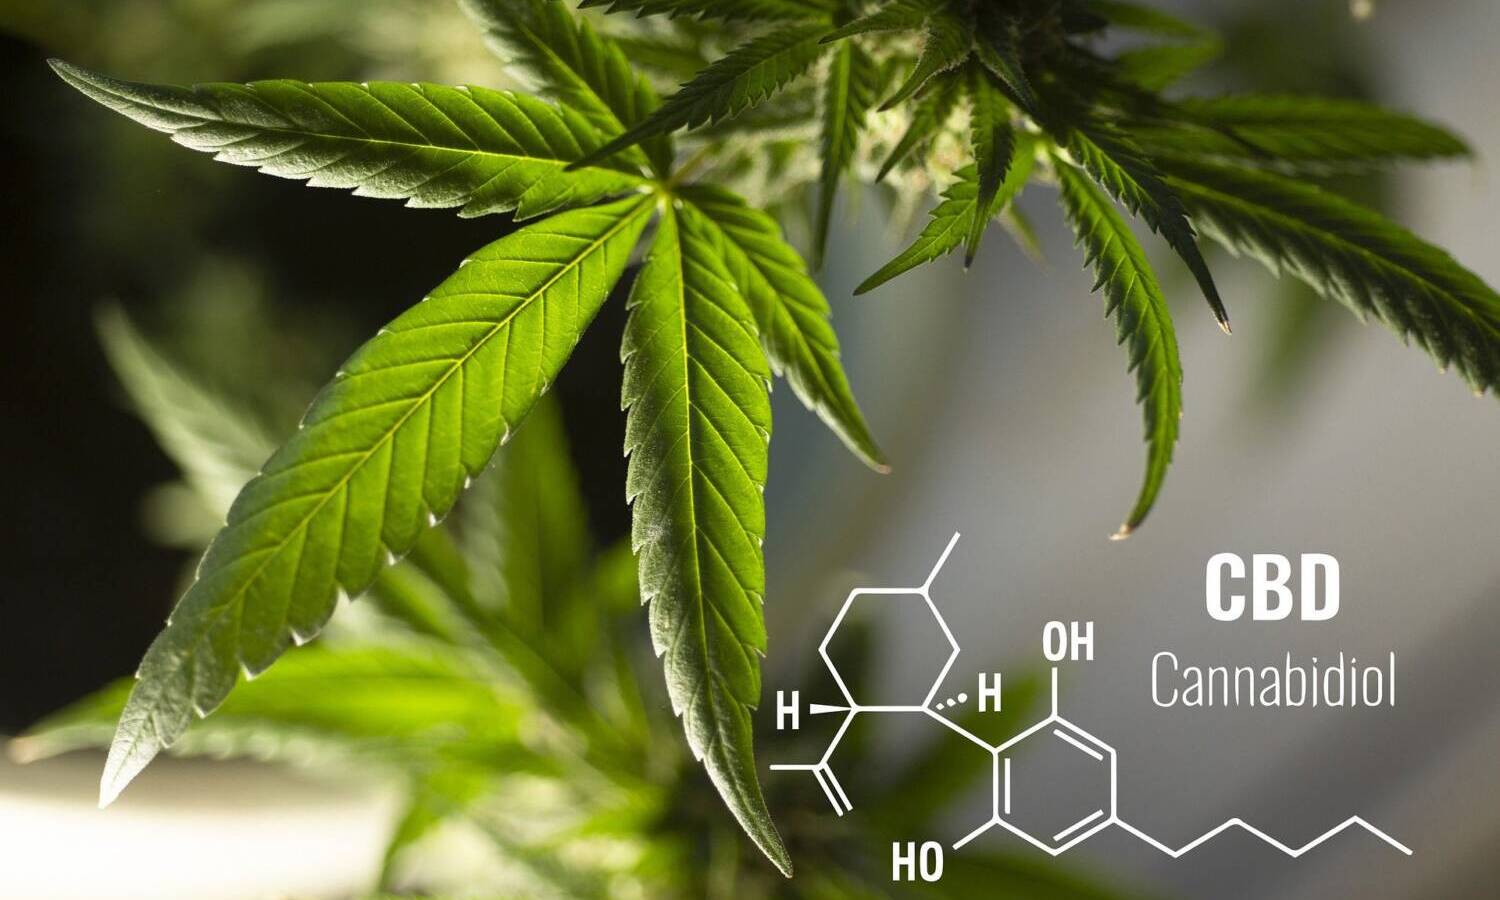 The Difference Between CBD From Hemp Or Cannabis